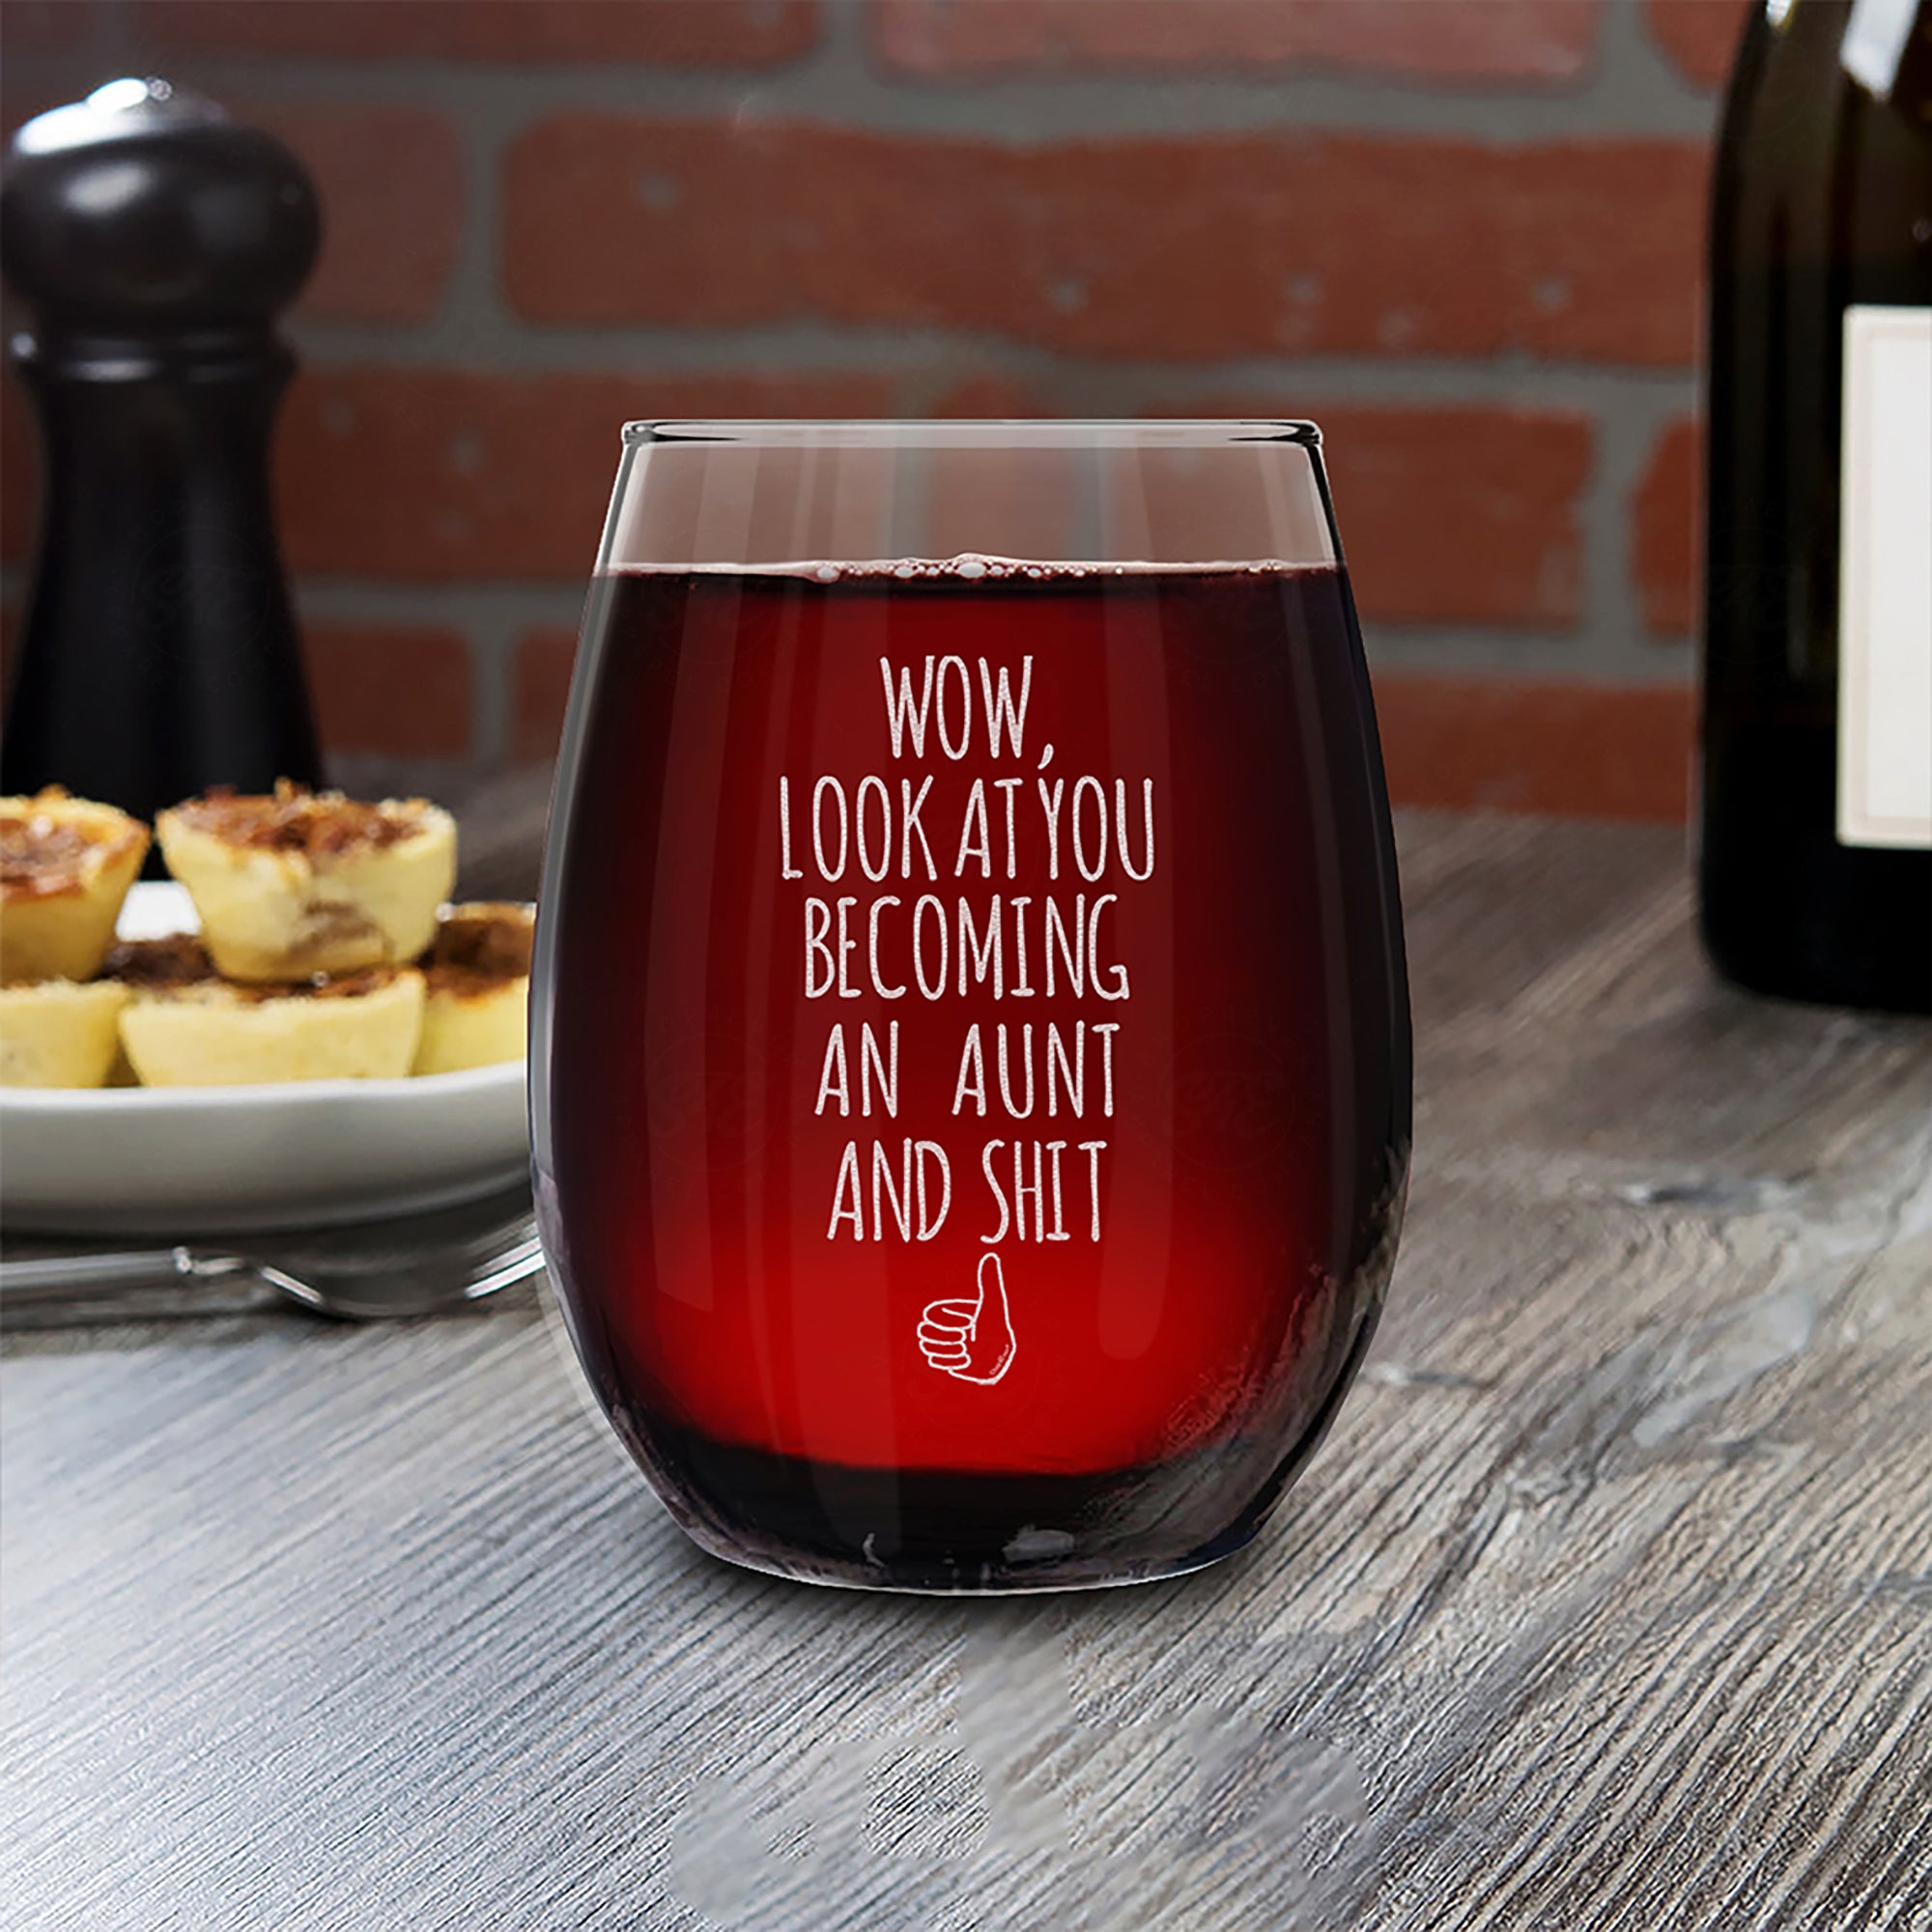 Wow, Look At You Becoming An Aunt Engraved Stemless Wine Glass Promoted to Aunt New Auntie (Aunt)